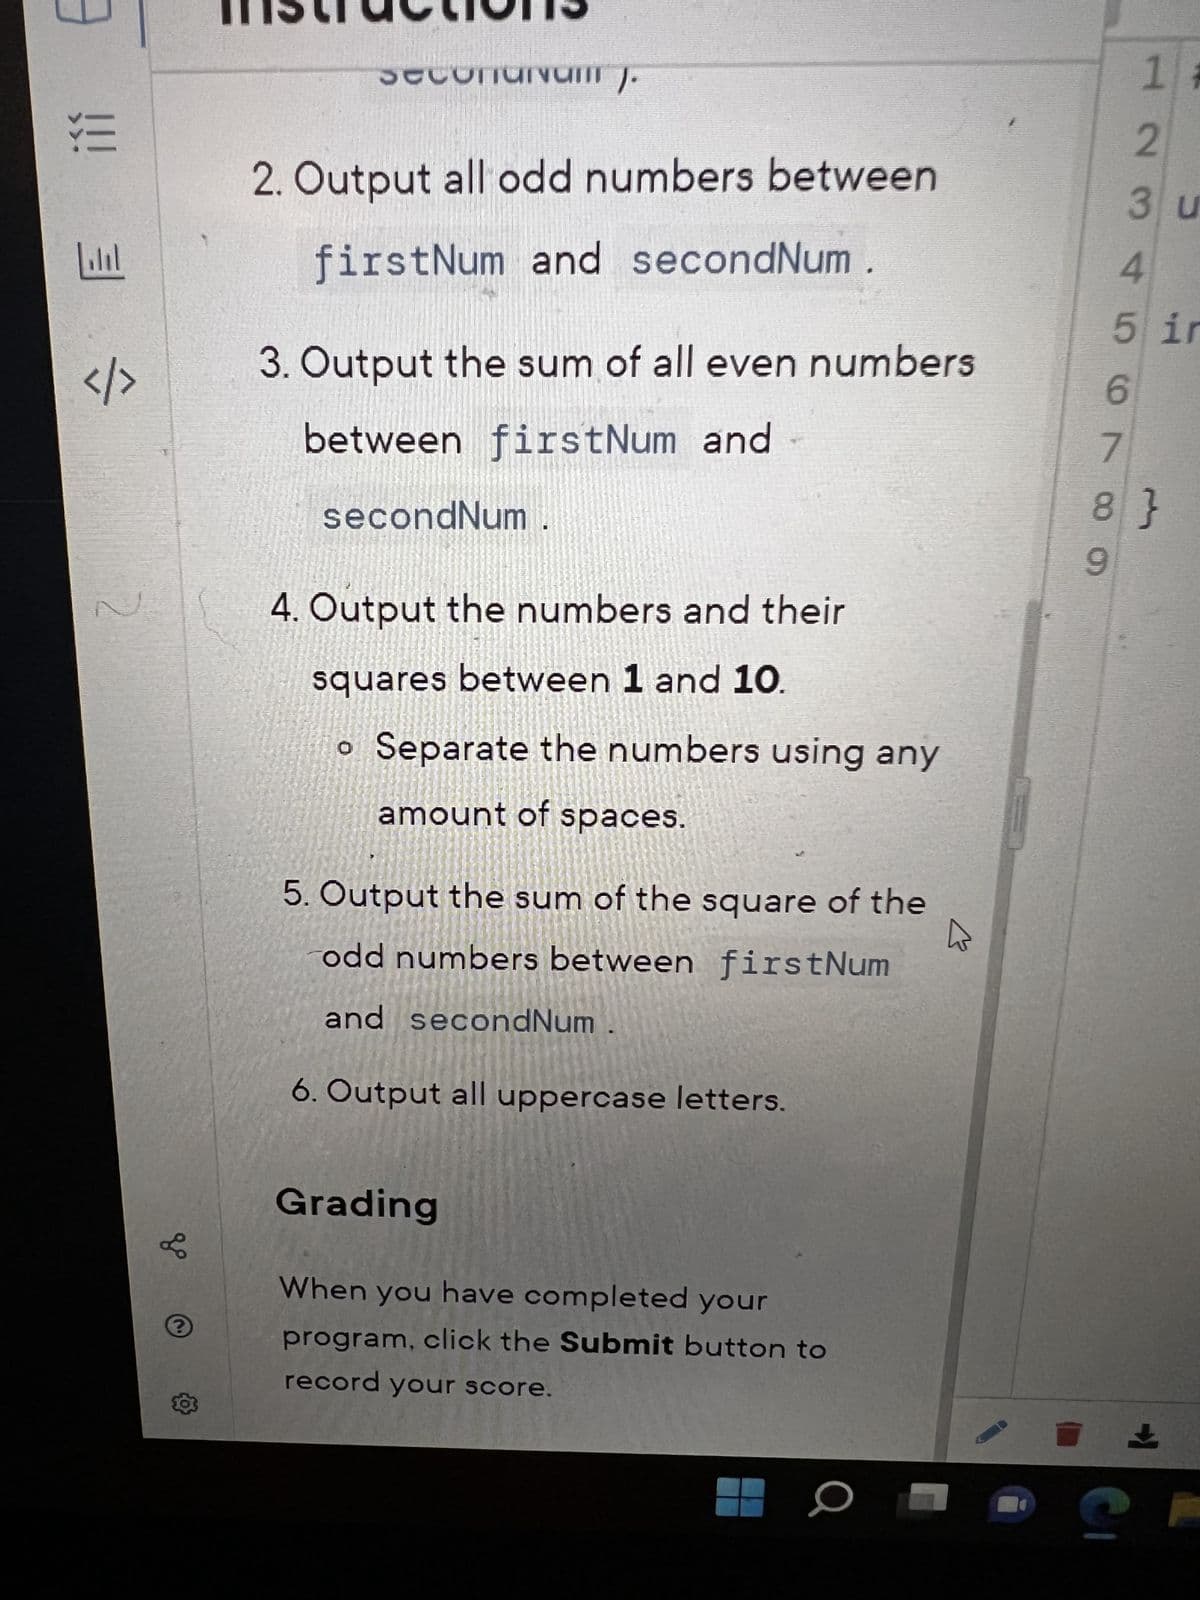 !!!!!!
|././
3
1/
gº
?
seconunum).
2. Output all odd numbers between
firstNum and secondNum
3. Output the sum of all even numbers
between firstNum and
secondNum
4. Output the numbers and their
squares between 1 and 10.
o Separate the numbers using any
amount of spaces.
5. Output the sum of the square of the
odd numbers between firstNum
and secondNum
6. Output all uppercase letters.
Grading
When you have completed your
program, click the Submit button to
record your score.
K
7
L6980
1#
3 u
4
5 ir
123
8}
2
±